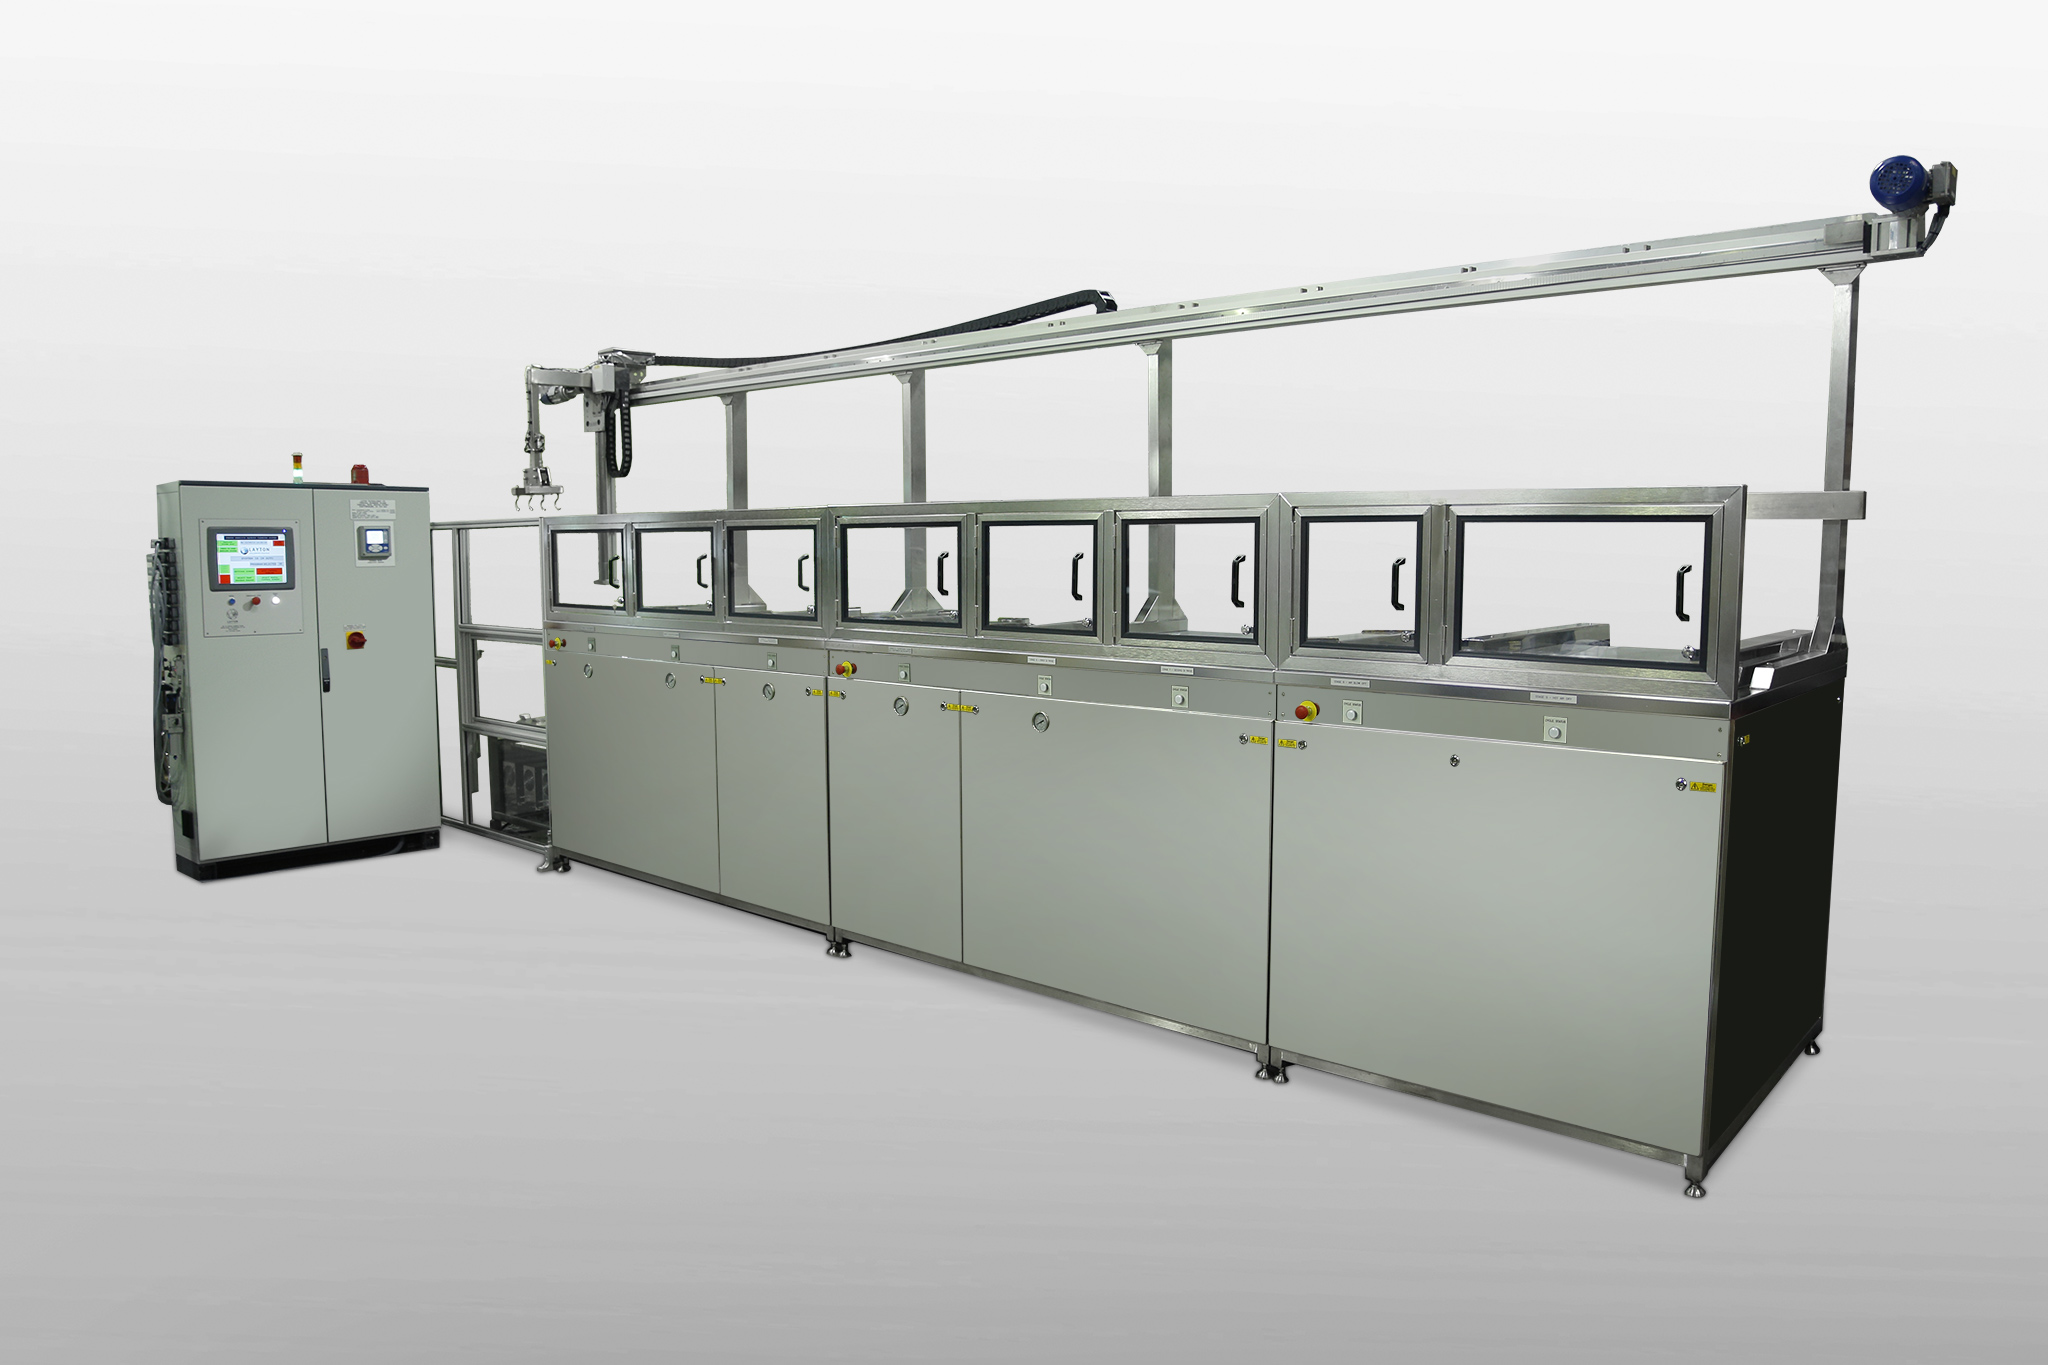 Benchtop Ultrasonic Cleaning Machine - For precision component cleaning &  degreasing applications.Layton Technologies